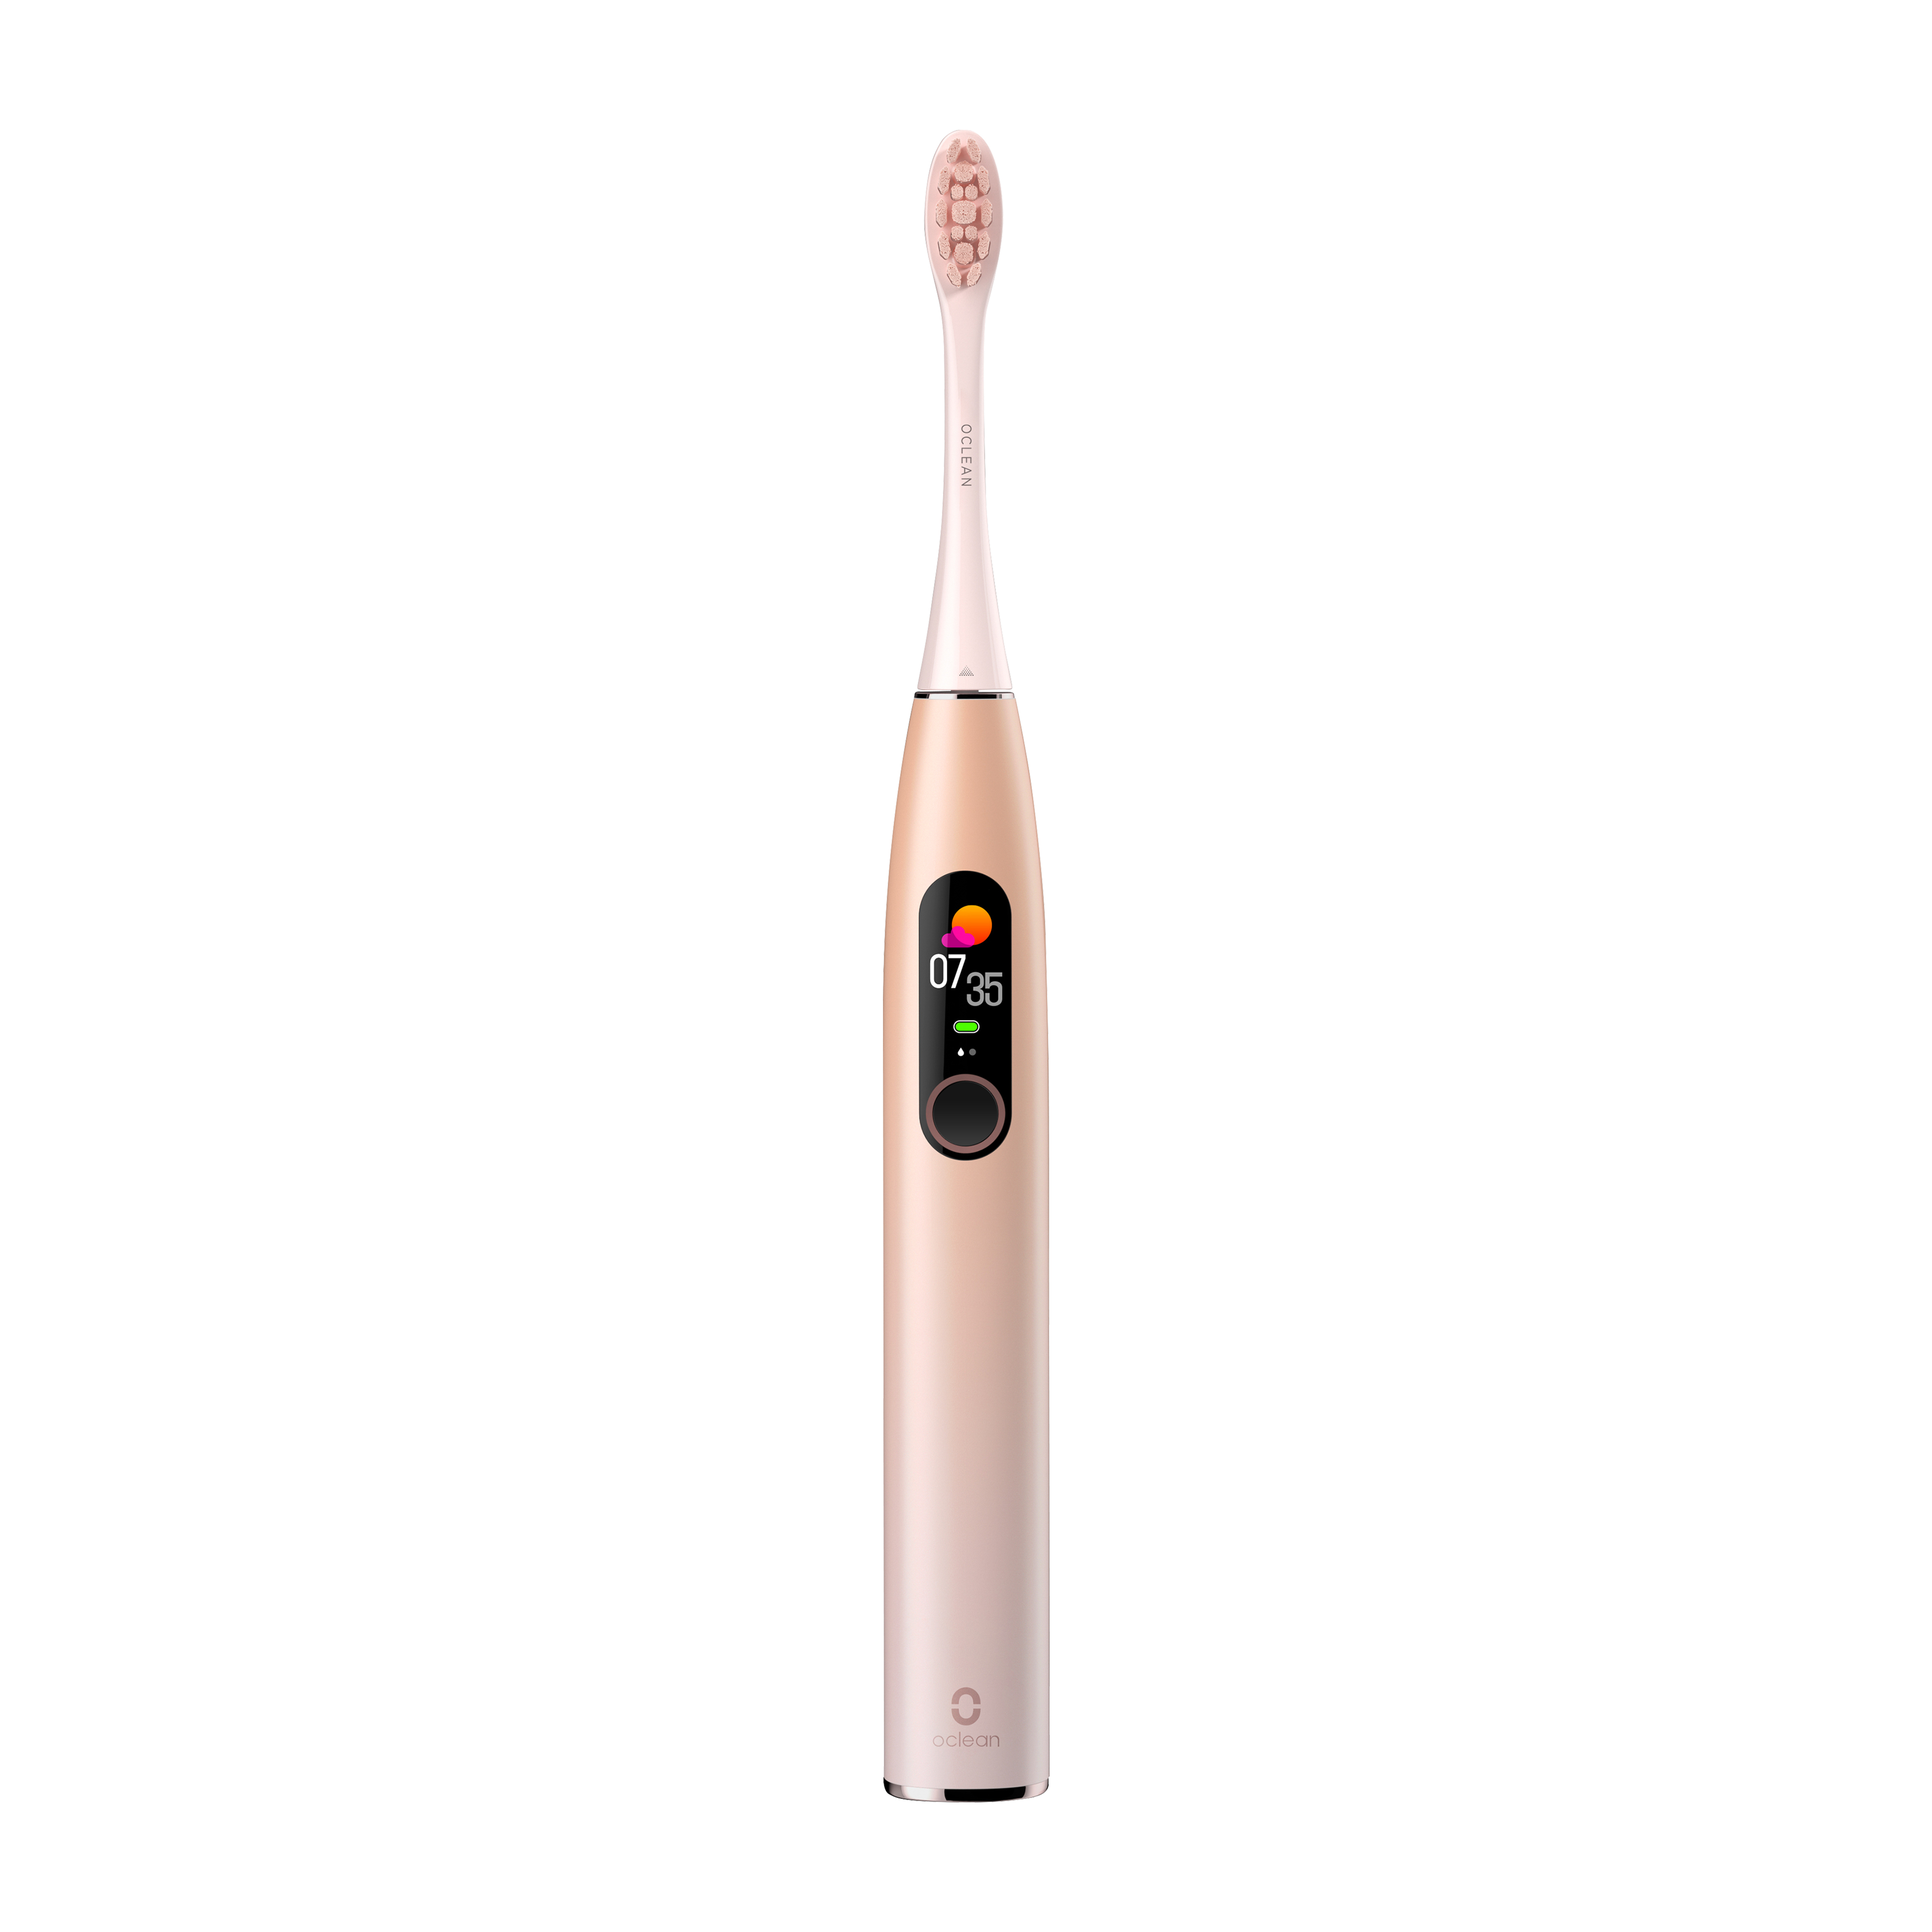 Oclean X Pro Smart Sonic Electric Toothbrush EAA00137